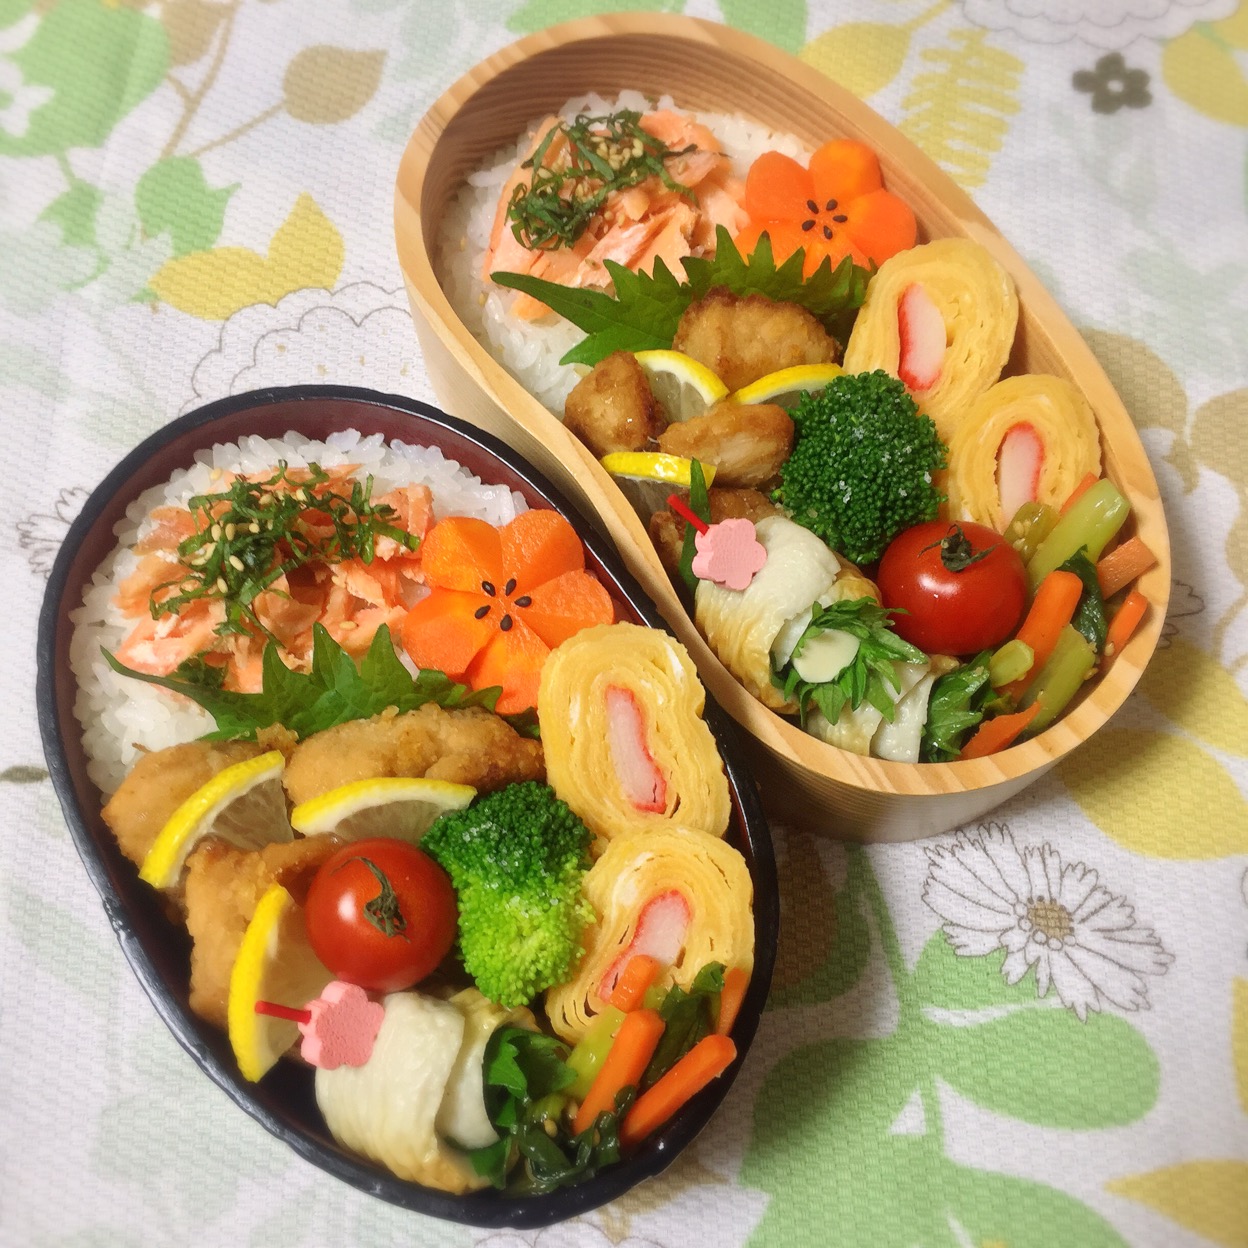 Let's cook Japane style Lunch box “Bento”!